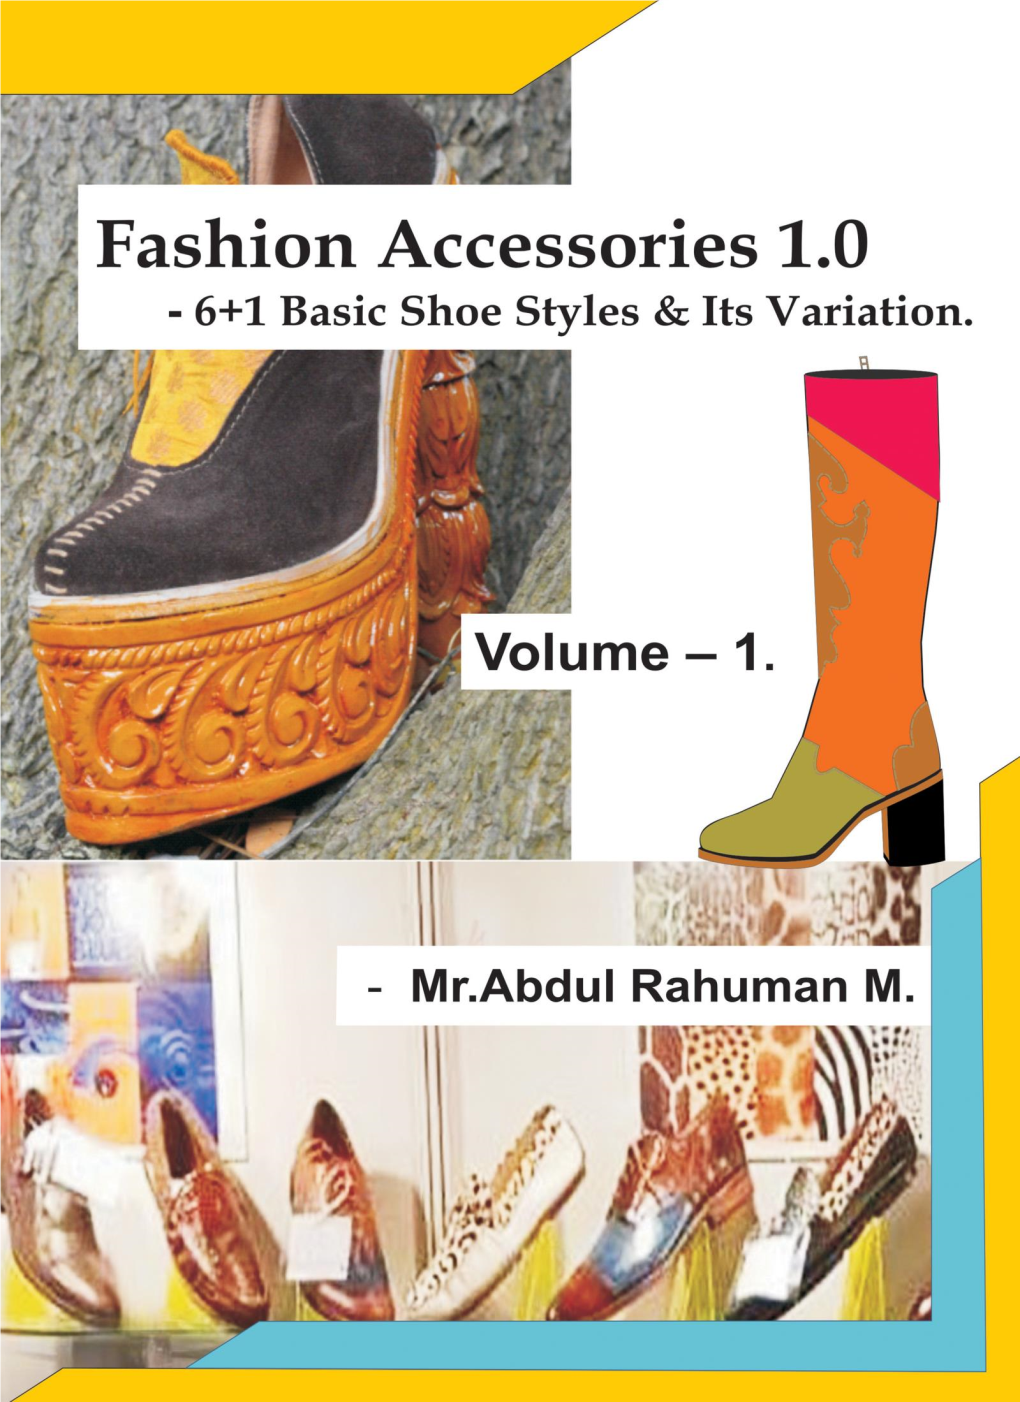 Fashion Accessories 1.0 - 6+1 Basic Shoe Styles & Its Variation